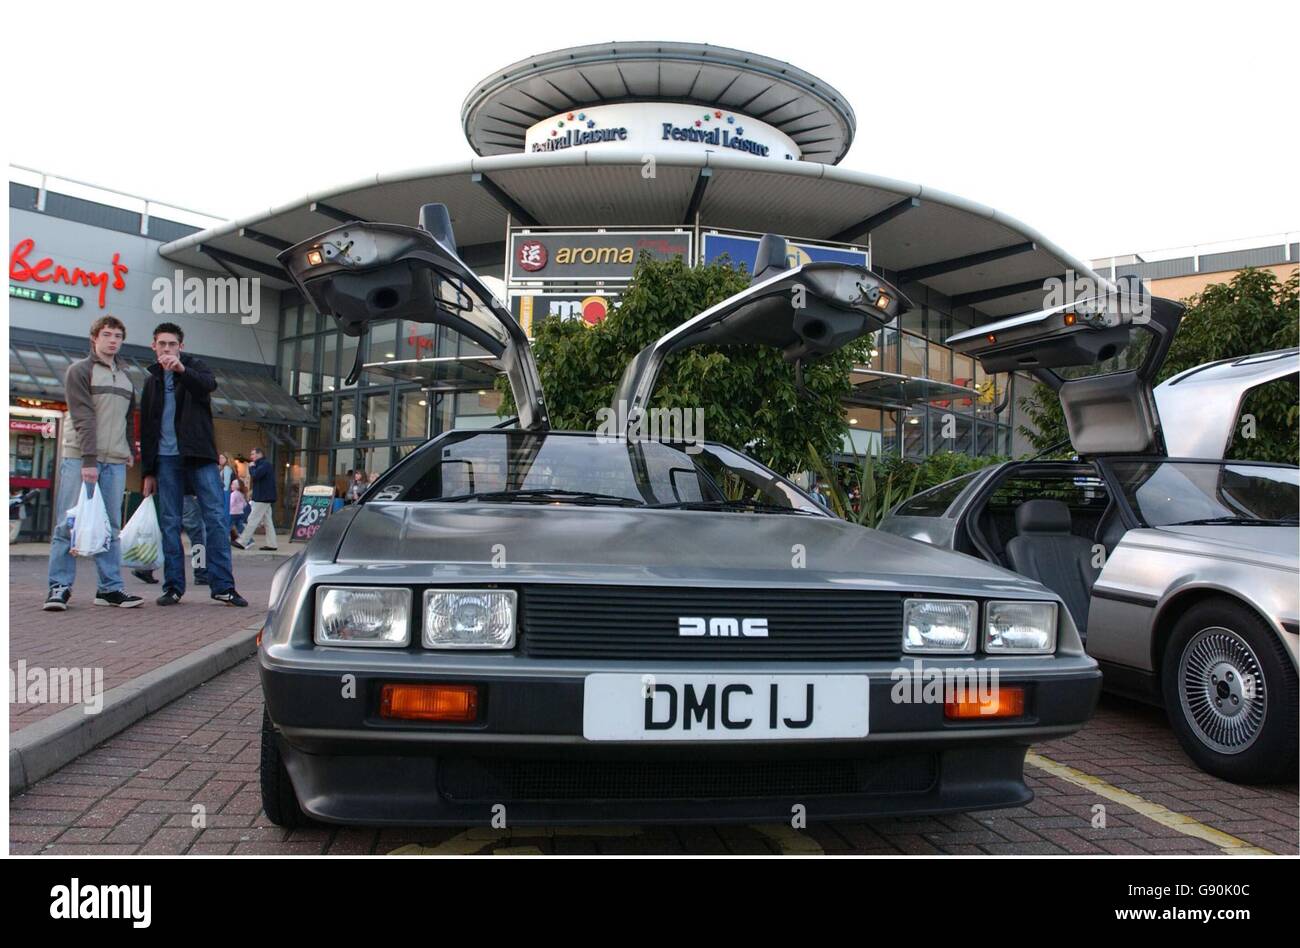 VIsitors take a look at the Delorean cars on display at Basildon UCI cinema, to mark a special showing of the Back to the Future films trilogy. In a rare event, more than 20 of the famous cars were bought together by the Delorean Owners Club. Stock Photo